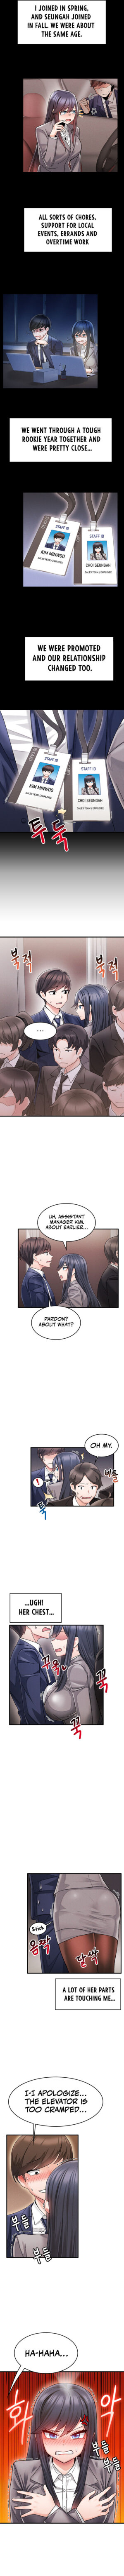 [Gaehoju, Gunnermul] Relationship Reverse Button: Let’s Make Her Submissive (1-9) [English] [Lunar Scans] [Ongoing]